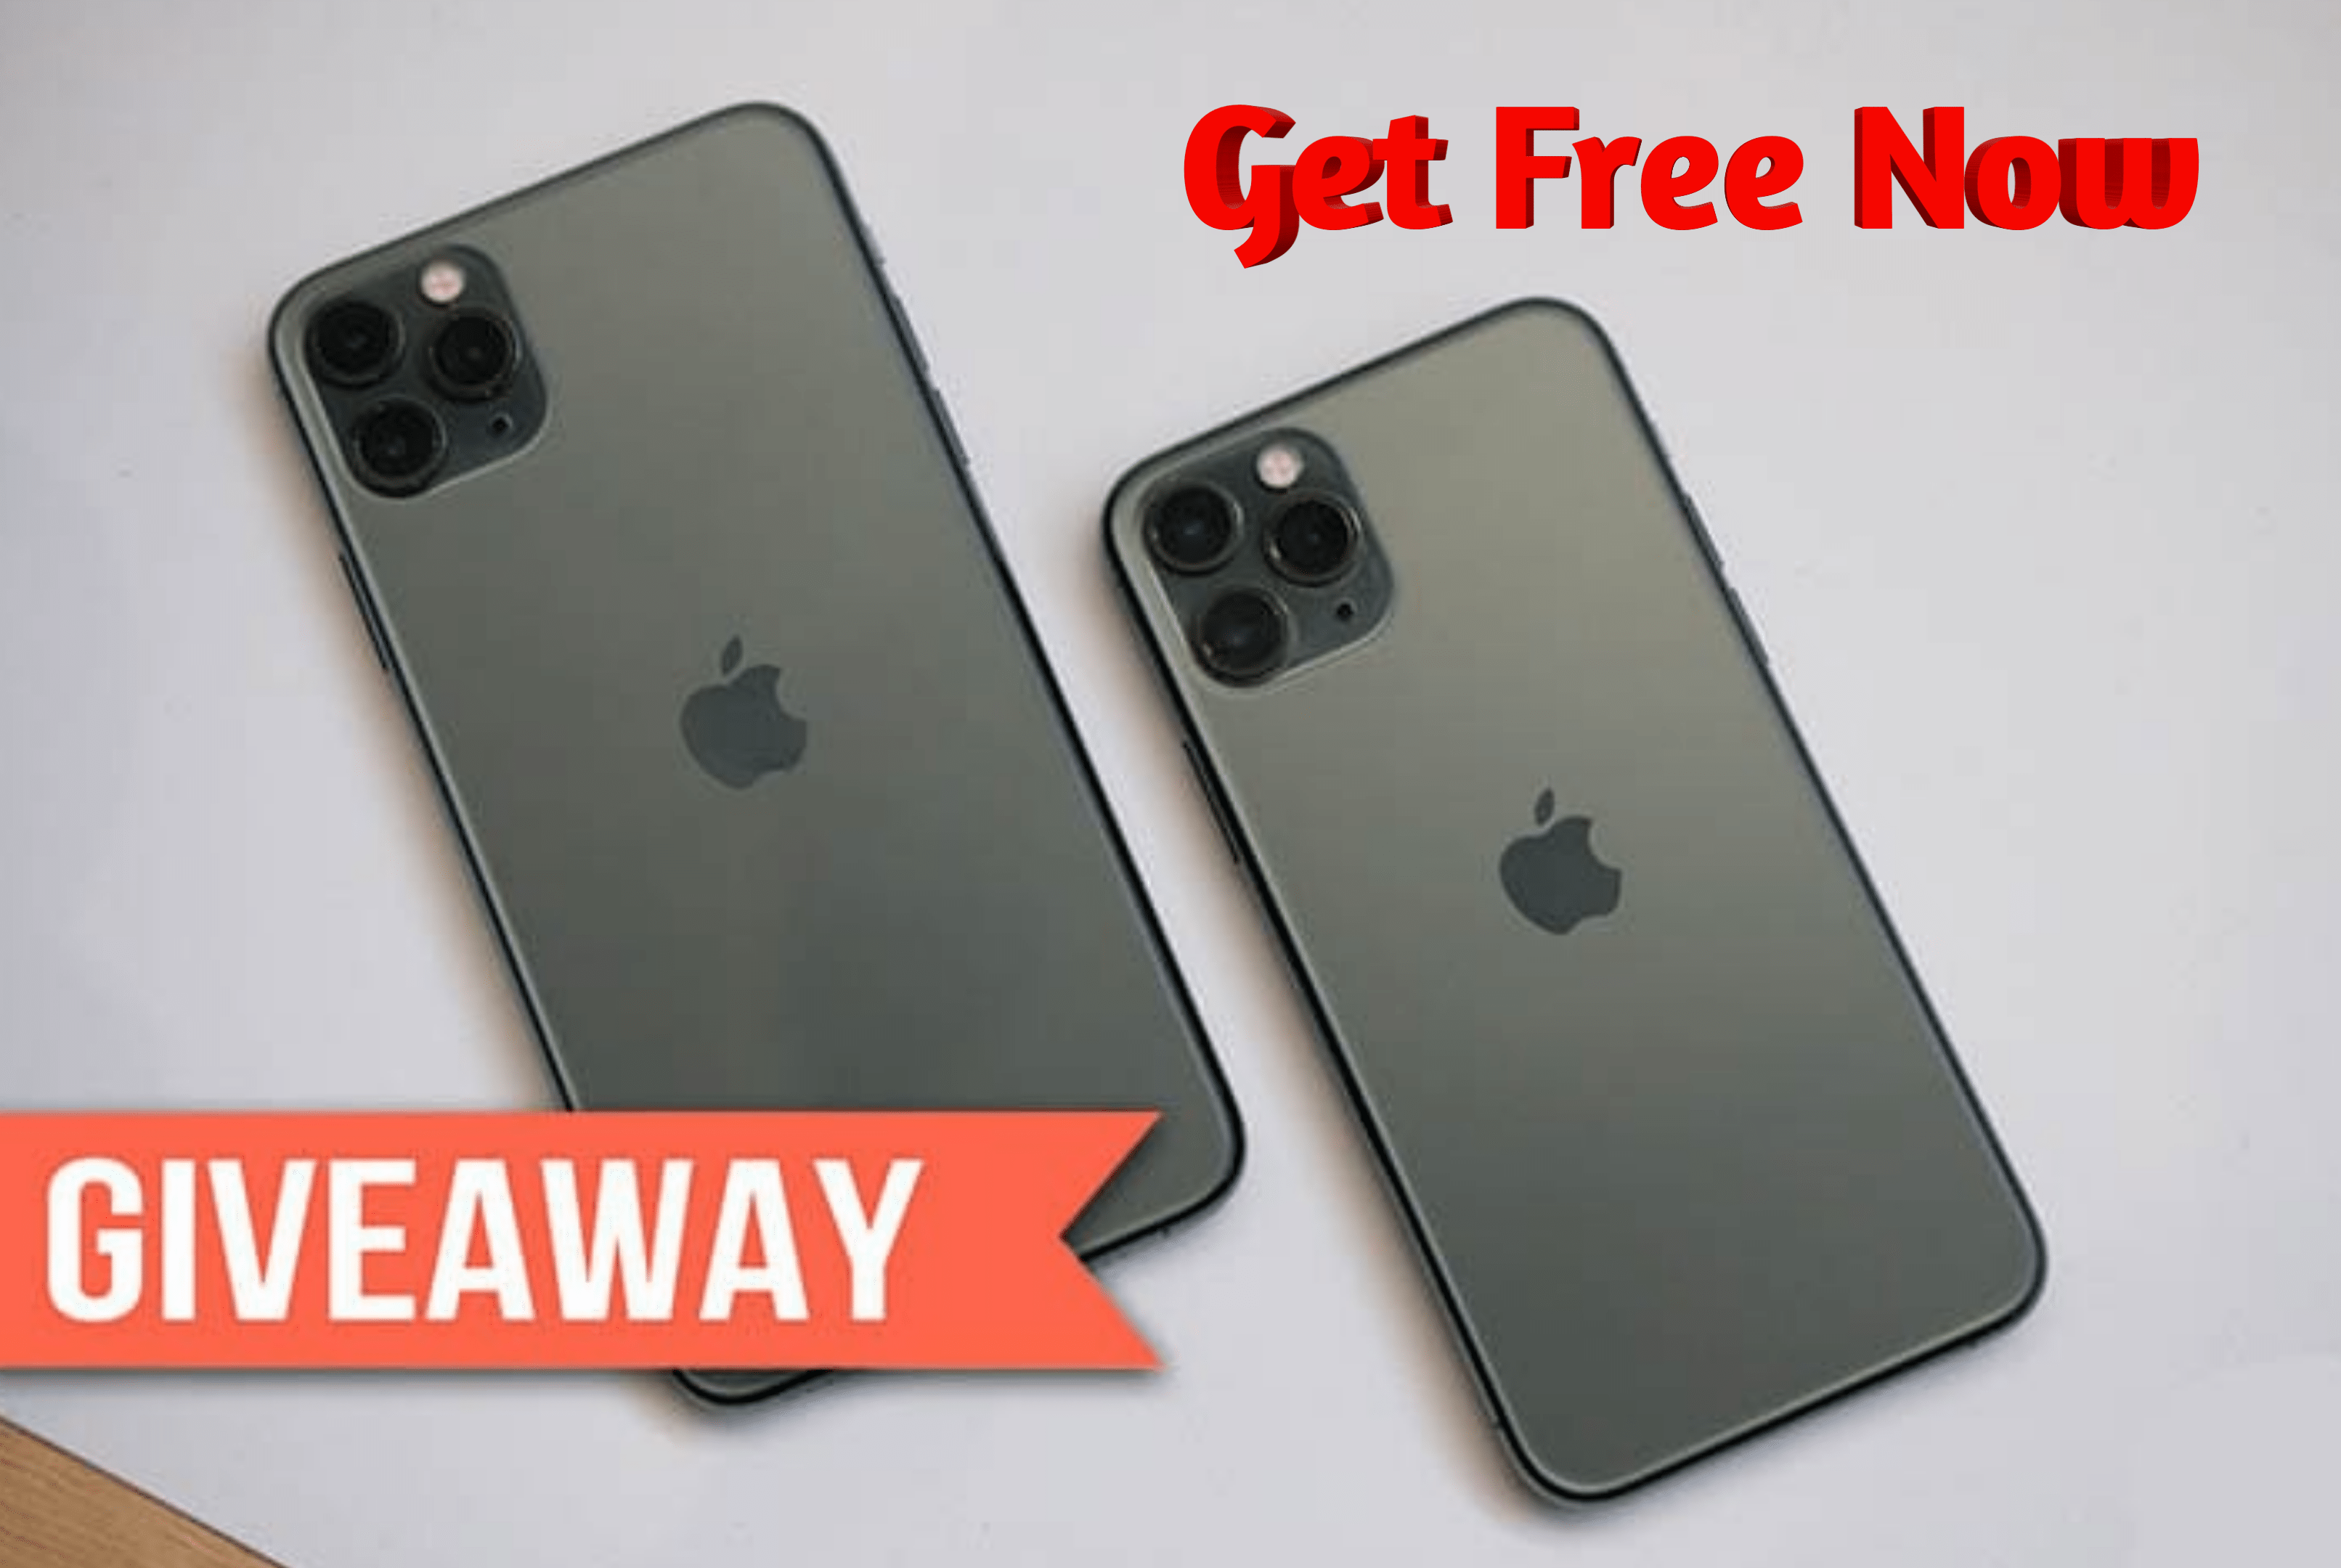 Get Free iPhone 11 And iPhone 11 Pro. Check Out Now